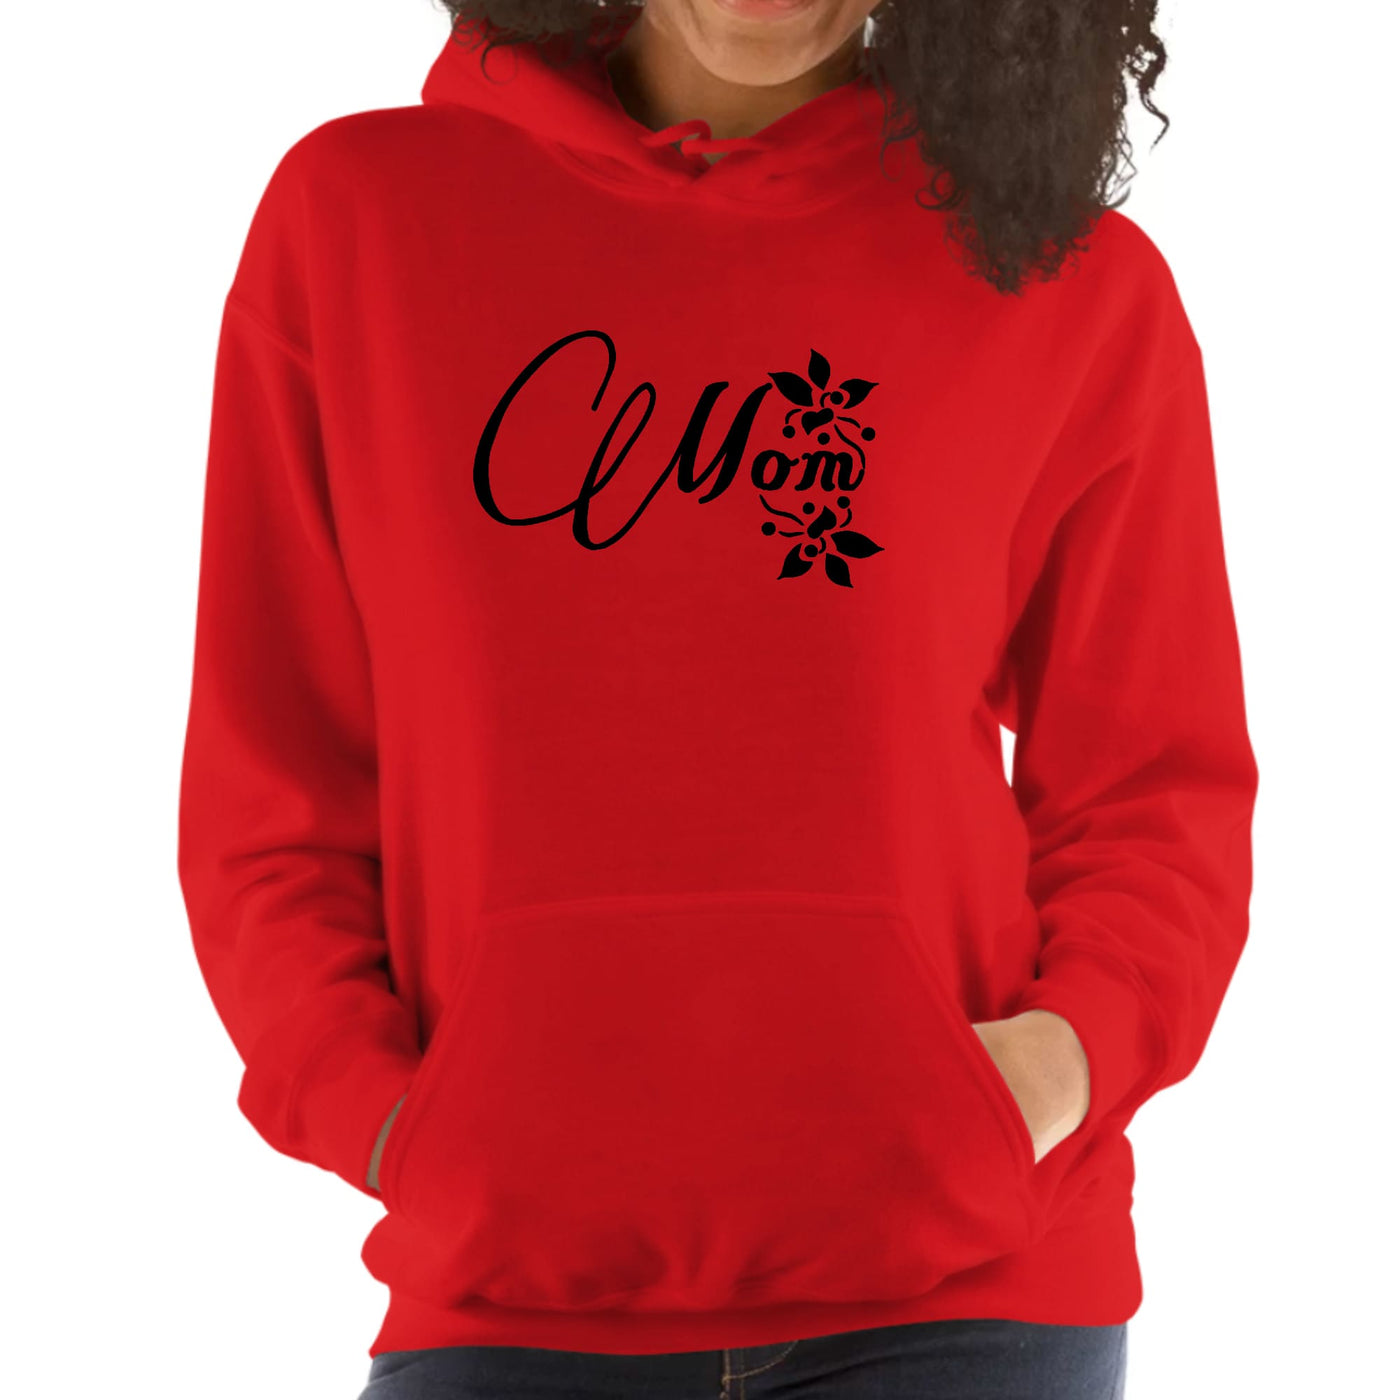 Womens Hoodie Mom Appreciation For Mothers - Womens | Hoodies